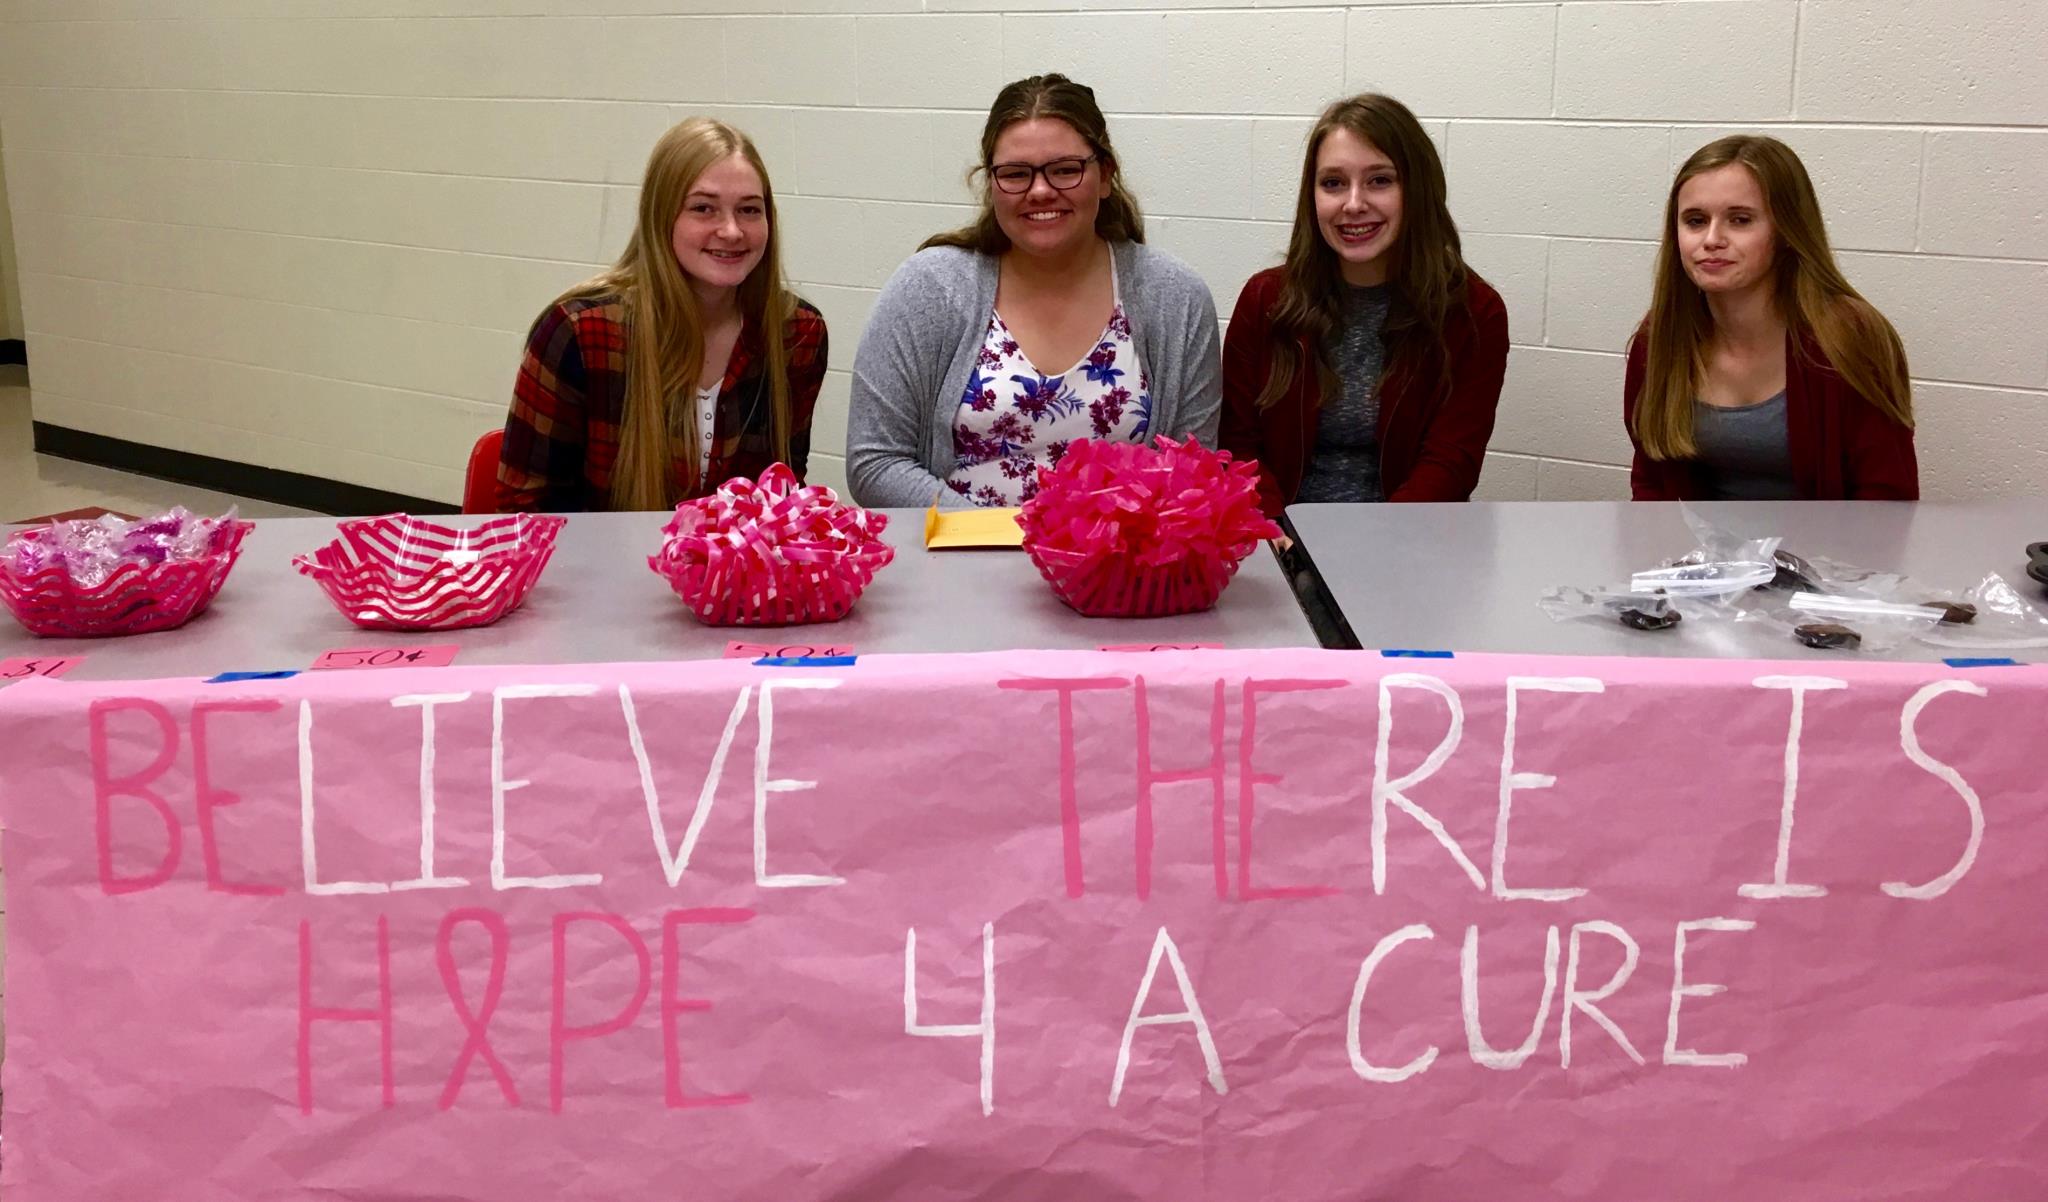 Girls at table with banner "believe there is hope for a cure"